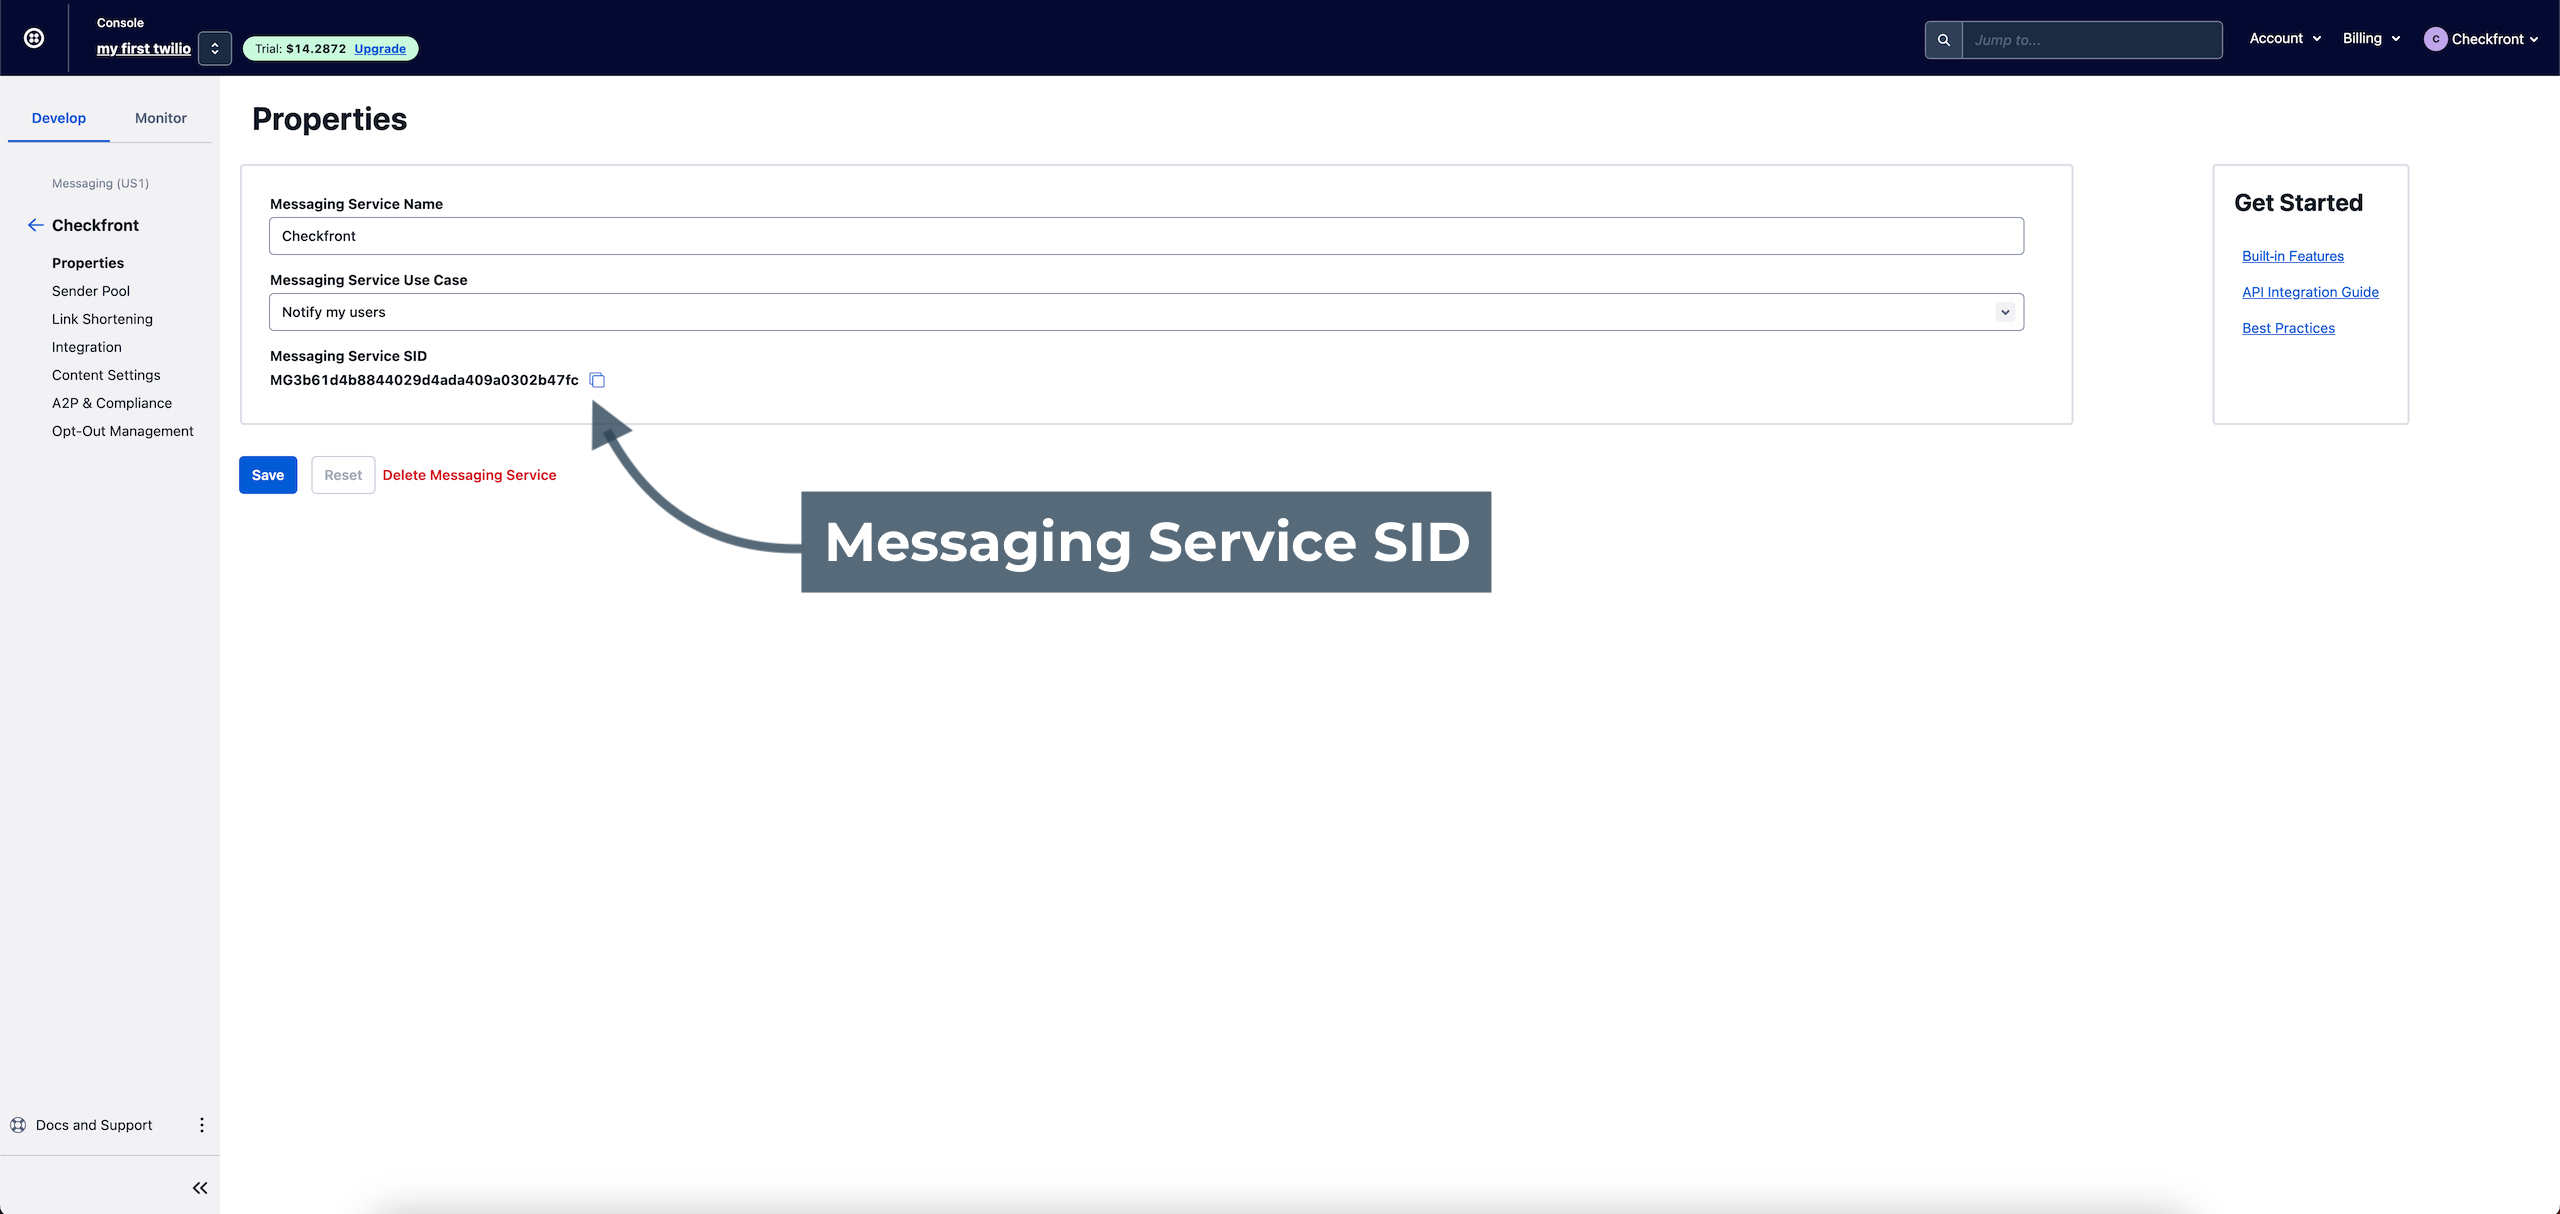 Messaging Service SID